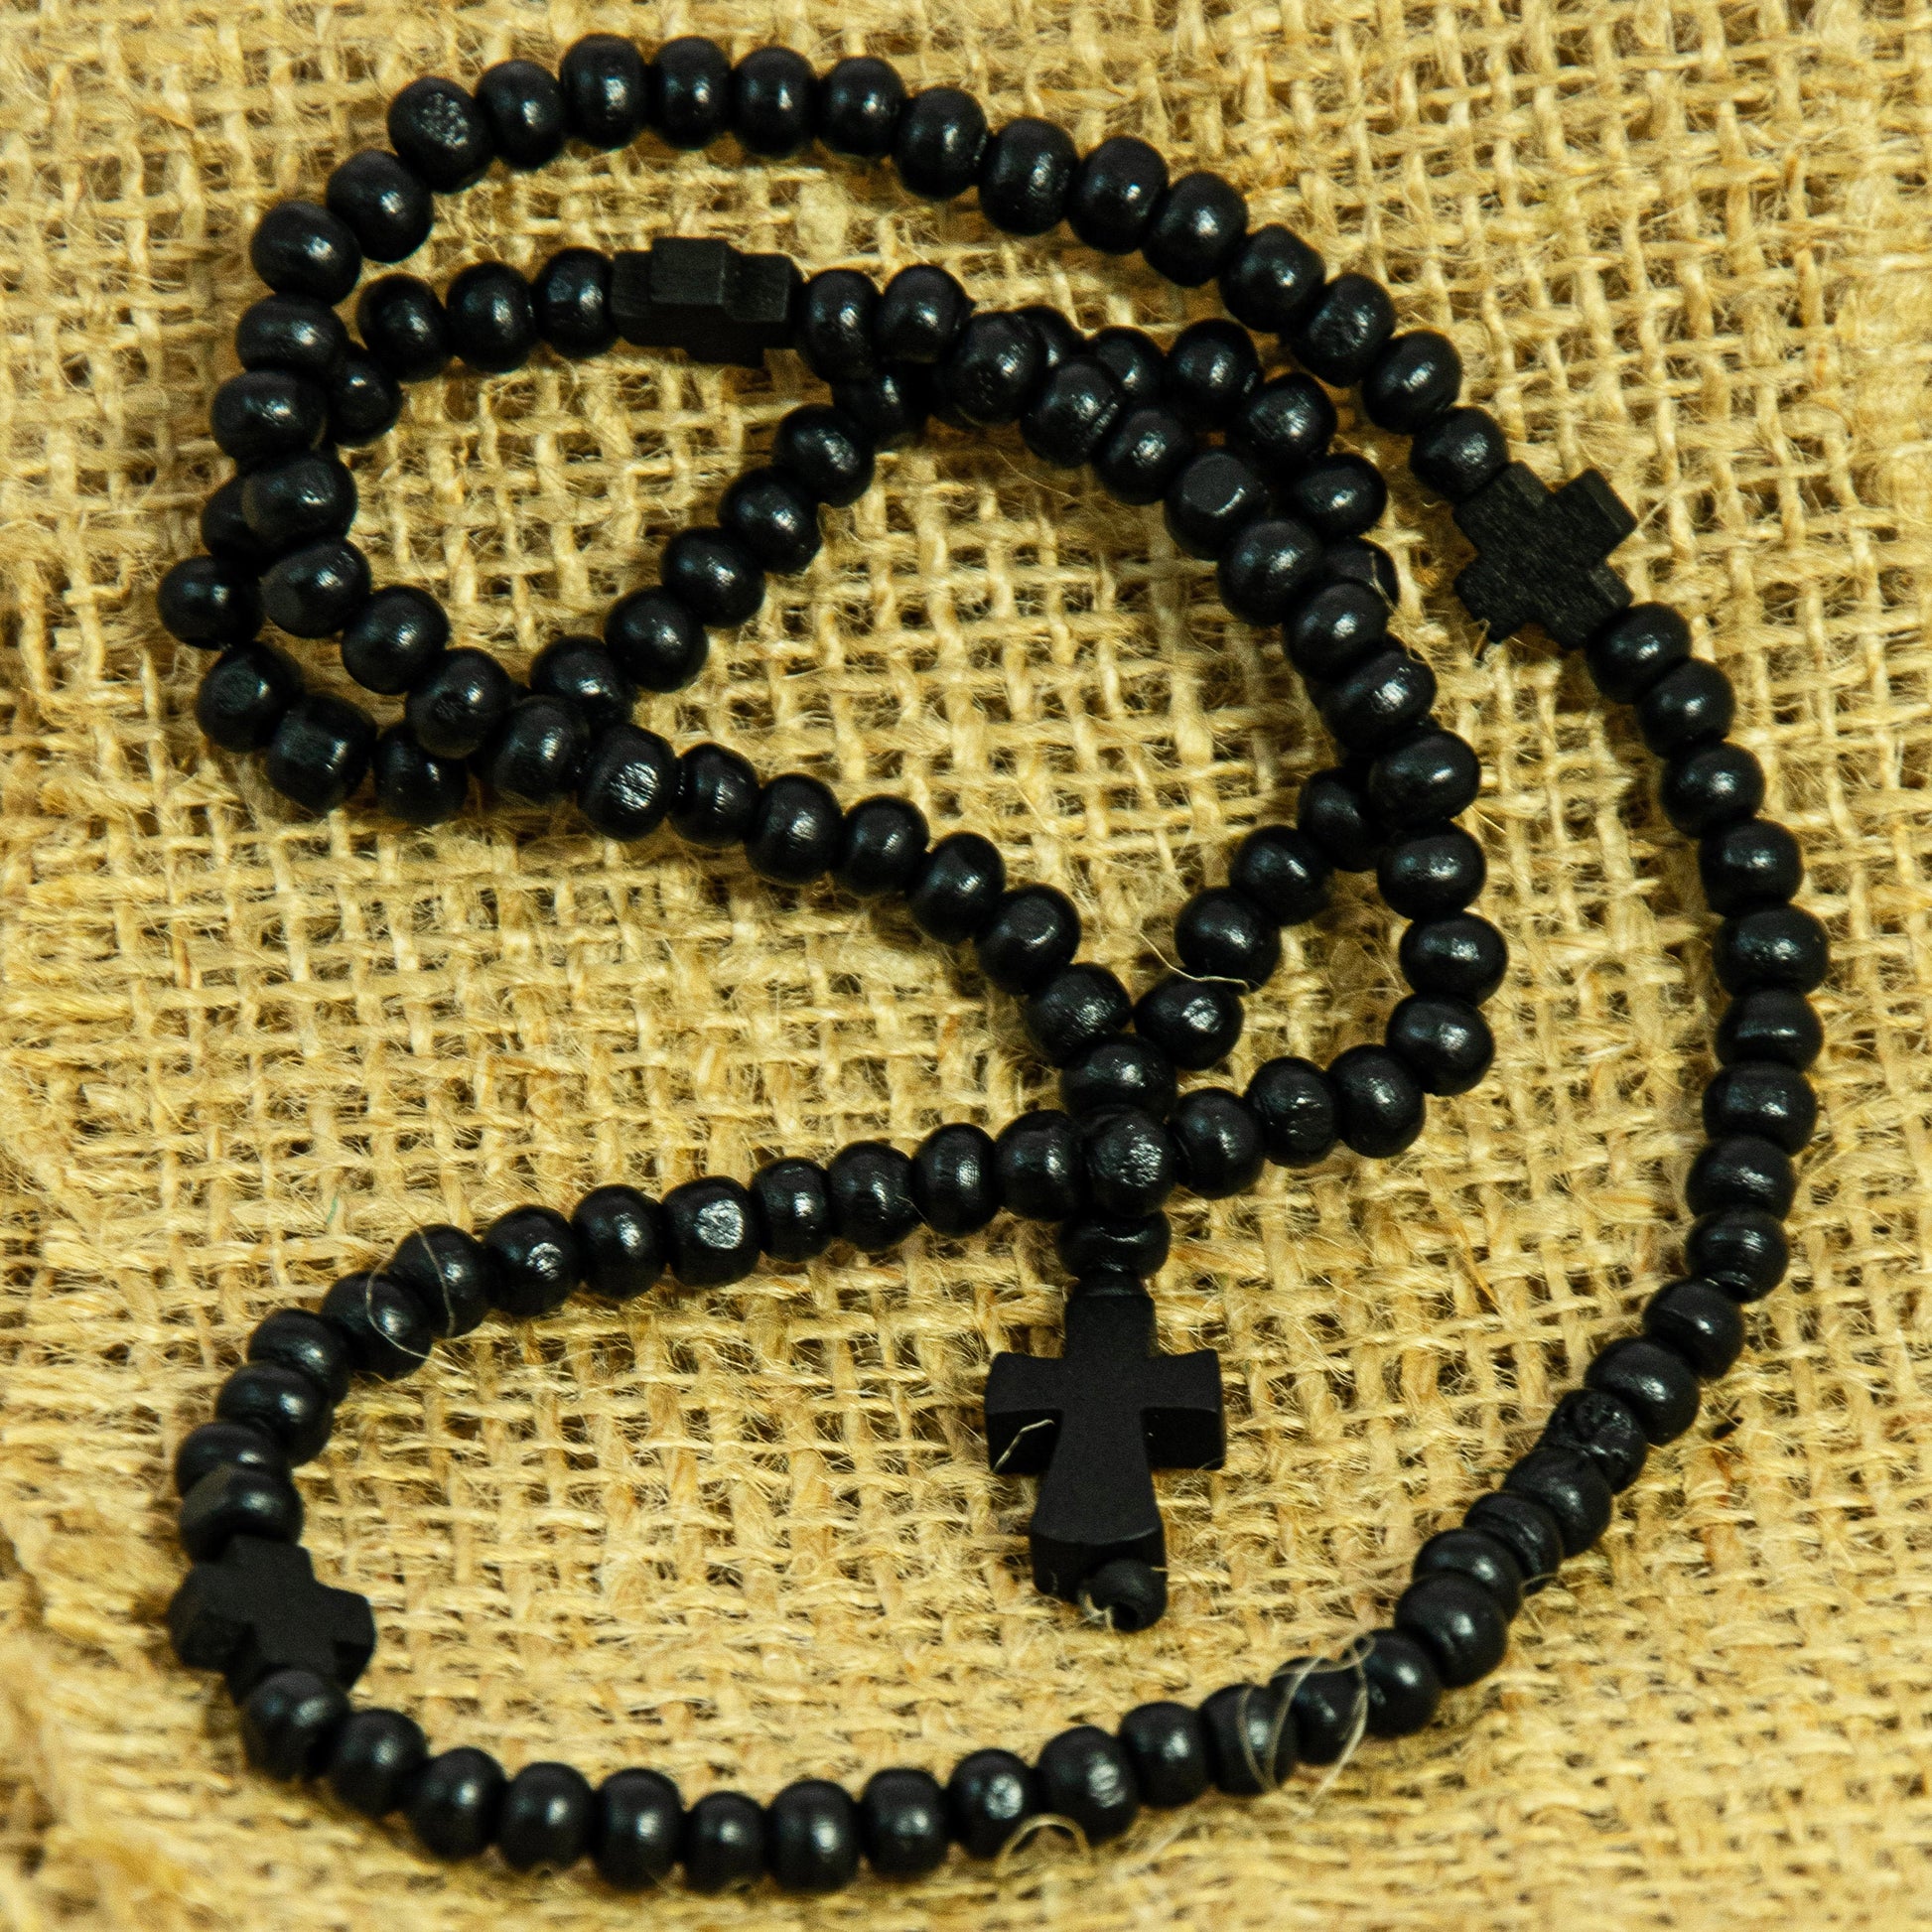 Black Wooden Beads, Rosary Making Supplies